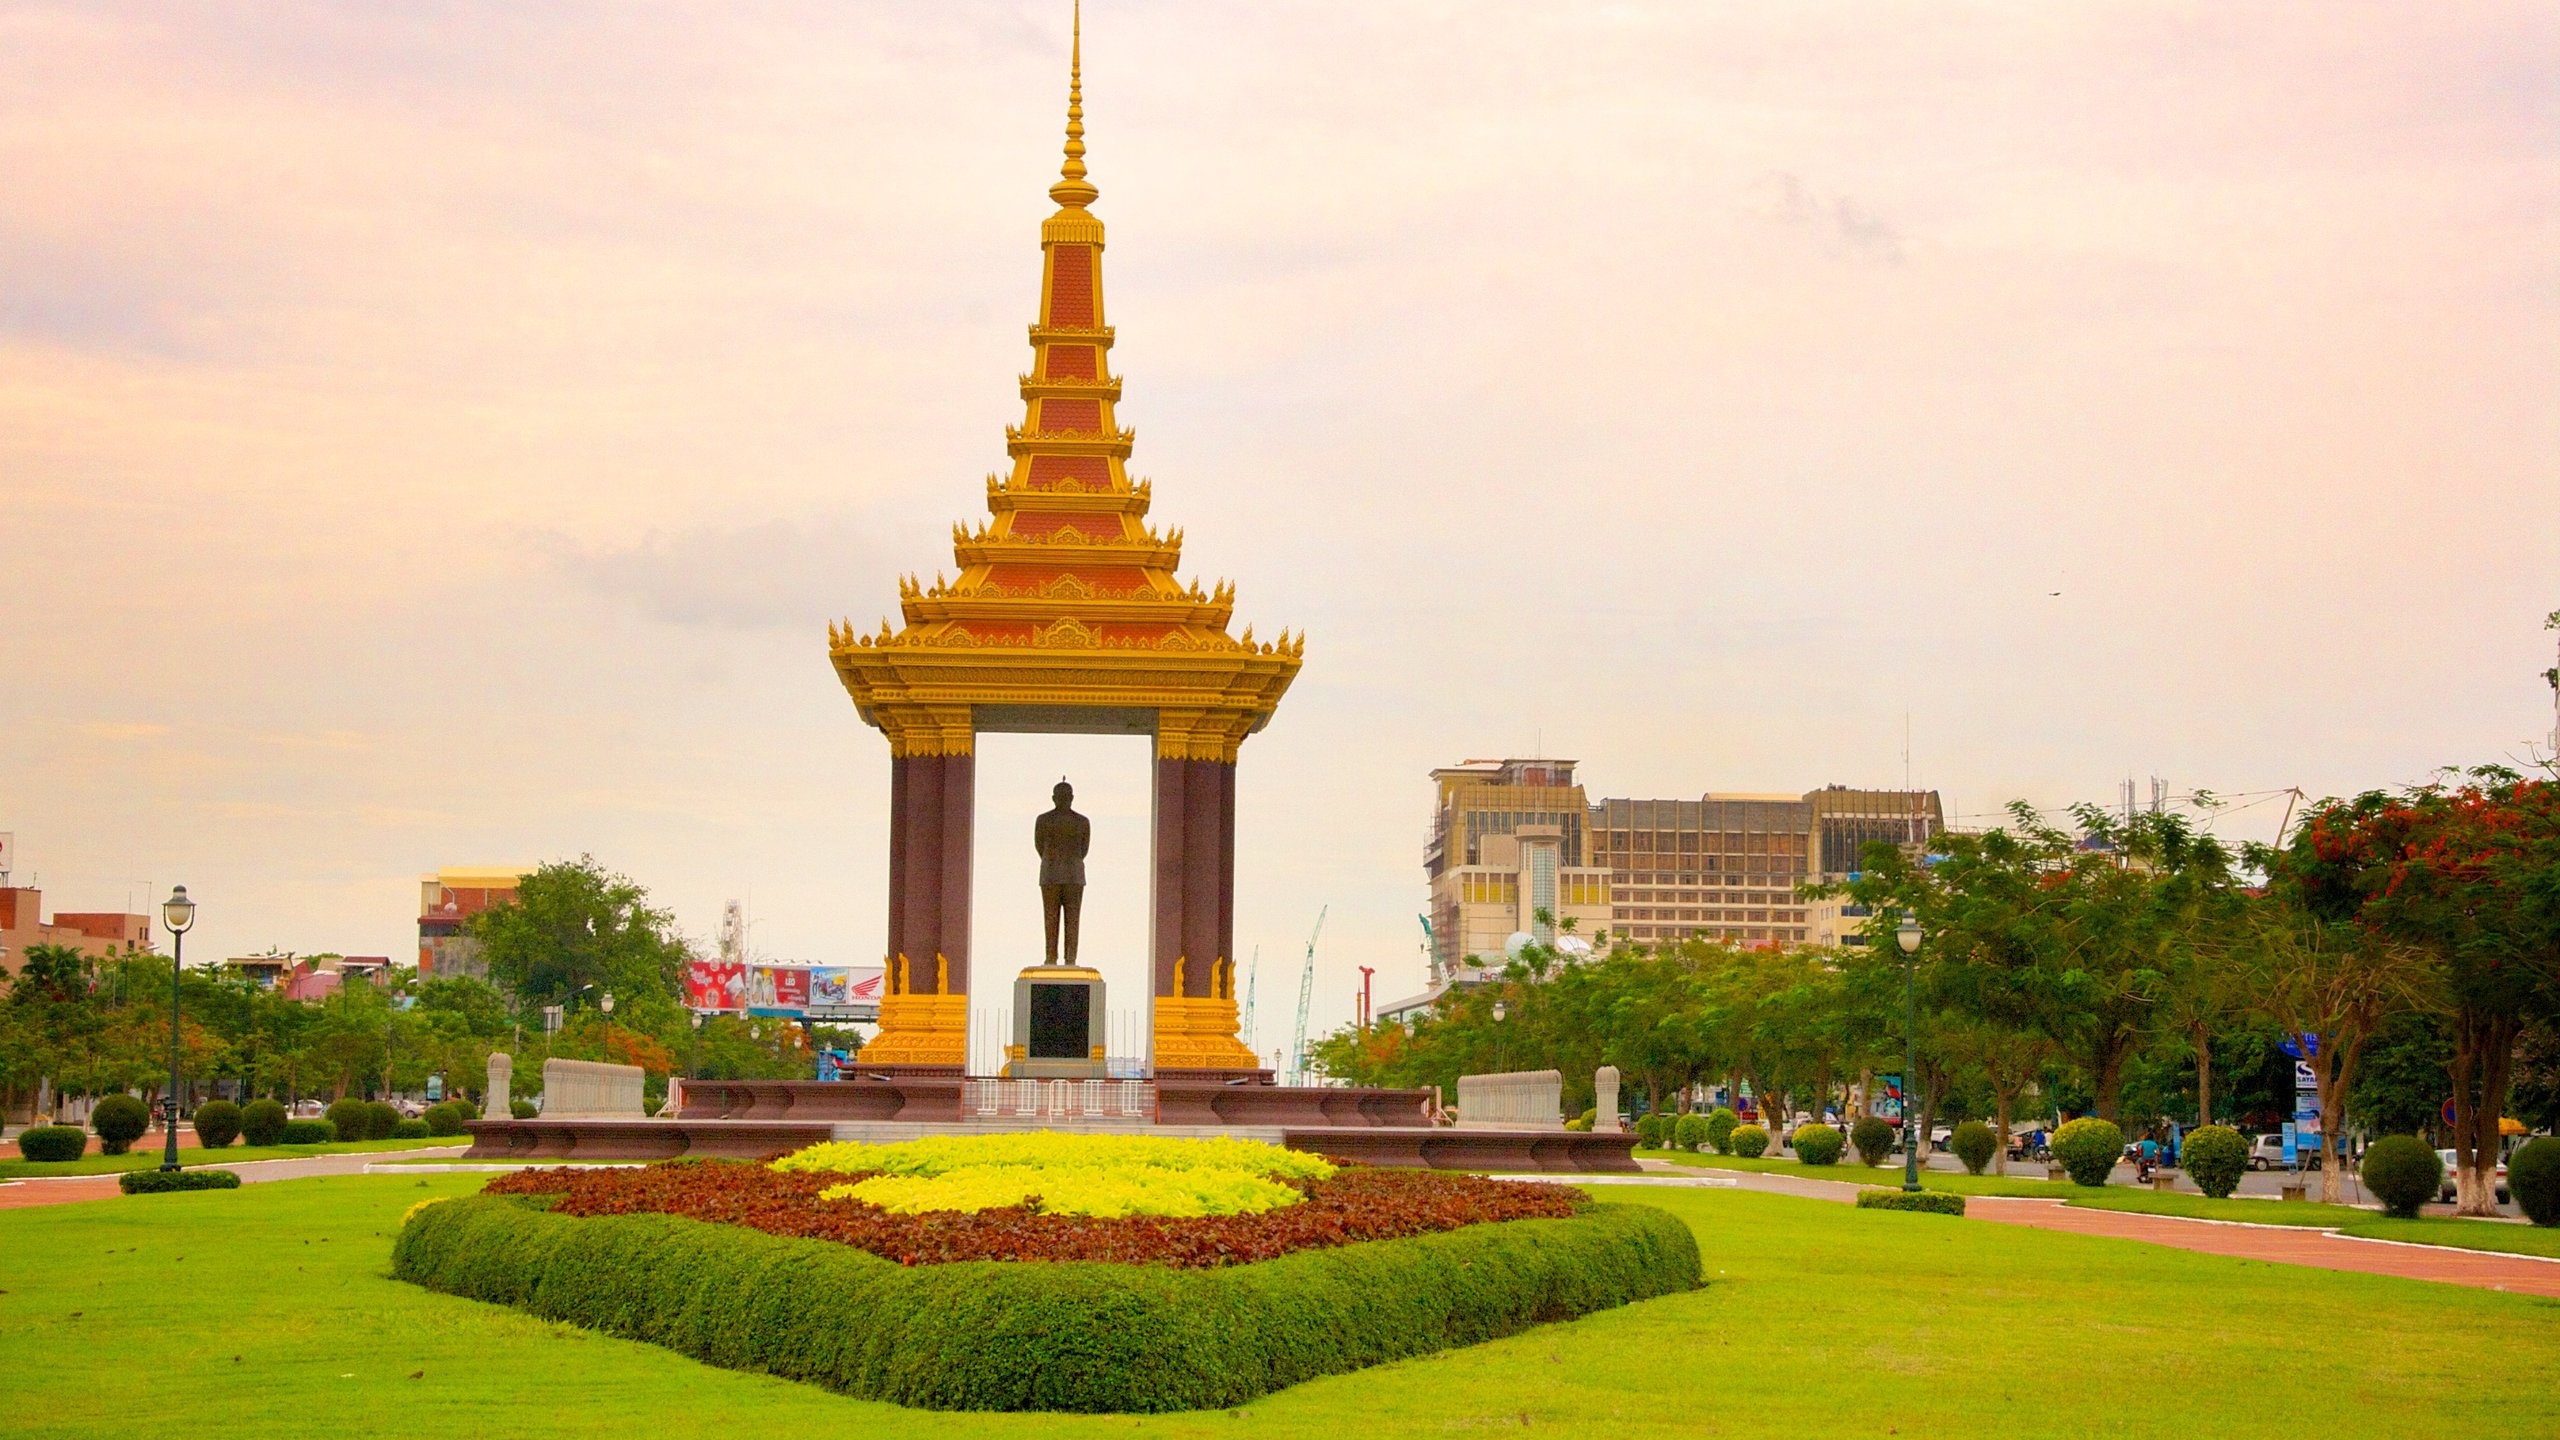 Phnom Penh attractions, Fun activities, Cultural immersion, Travel recommendations, 2560x1440 HD Desktop